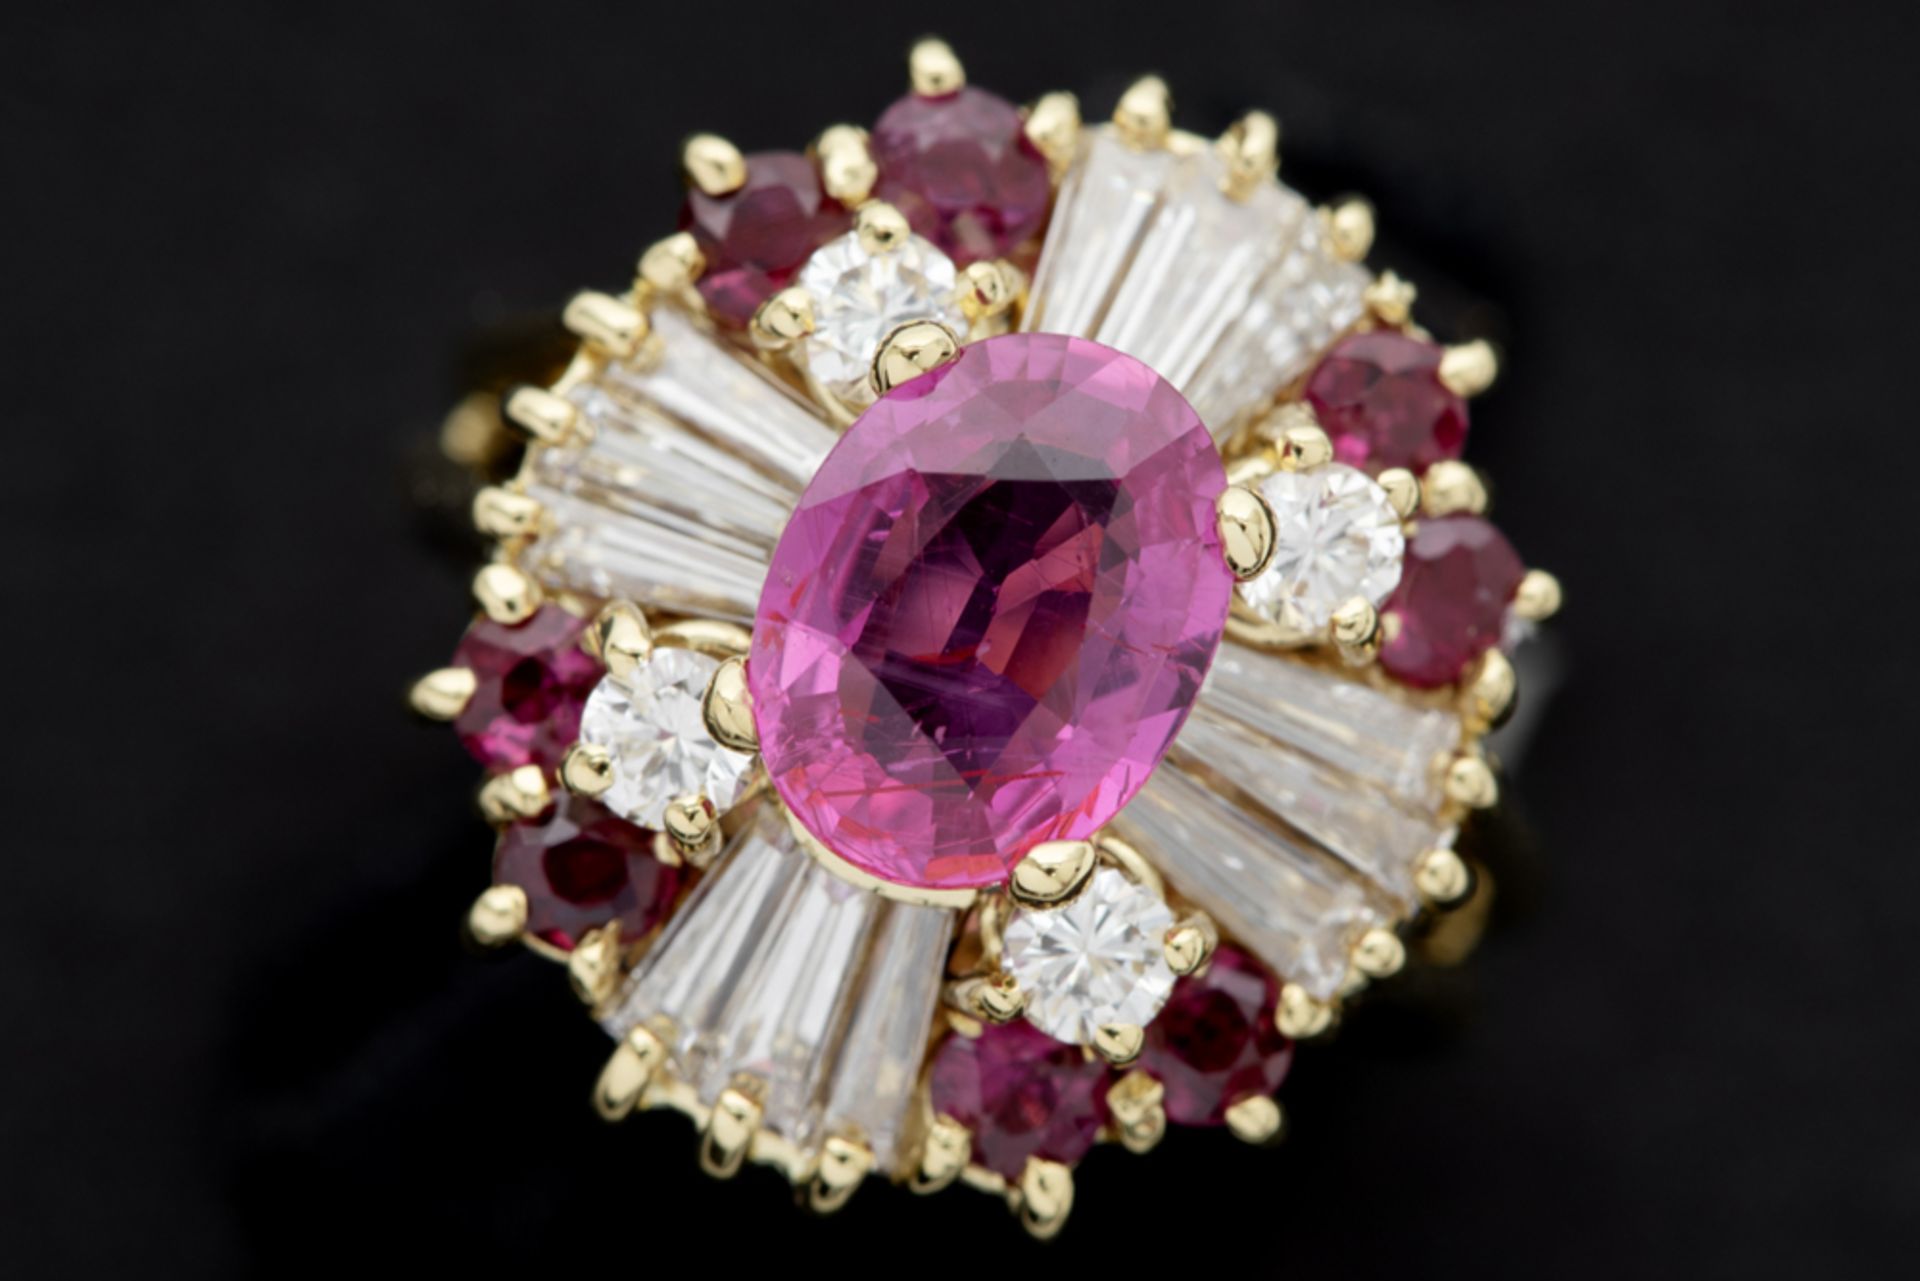 eighties' ring in yellow gold (18 carat) with a 1,61 carat oval non-heated pink sapphire